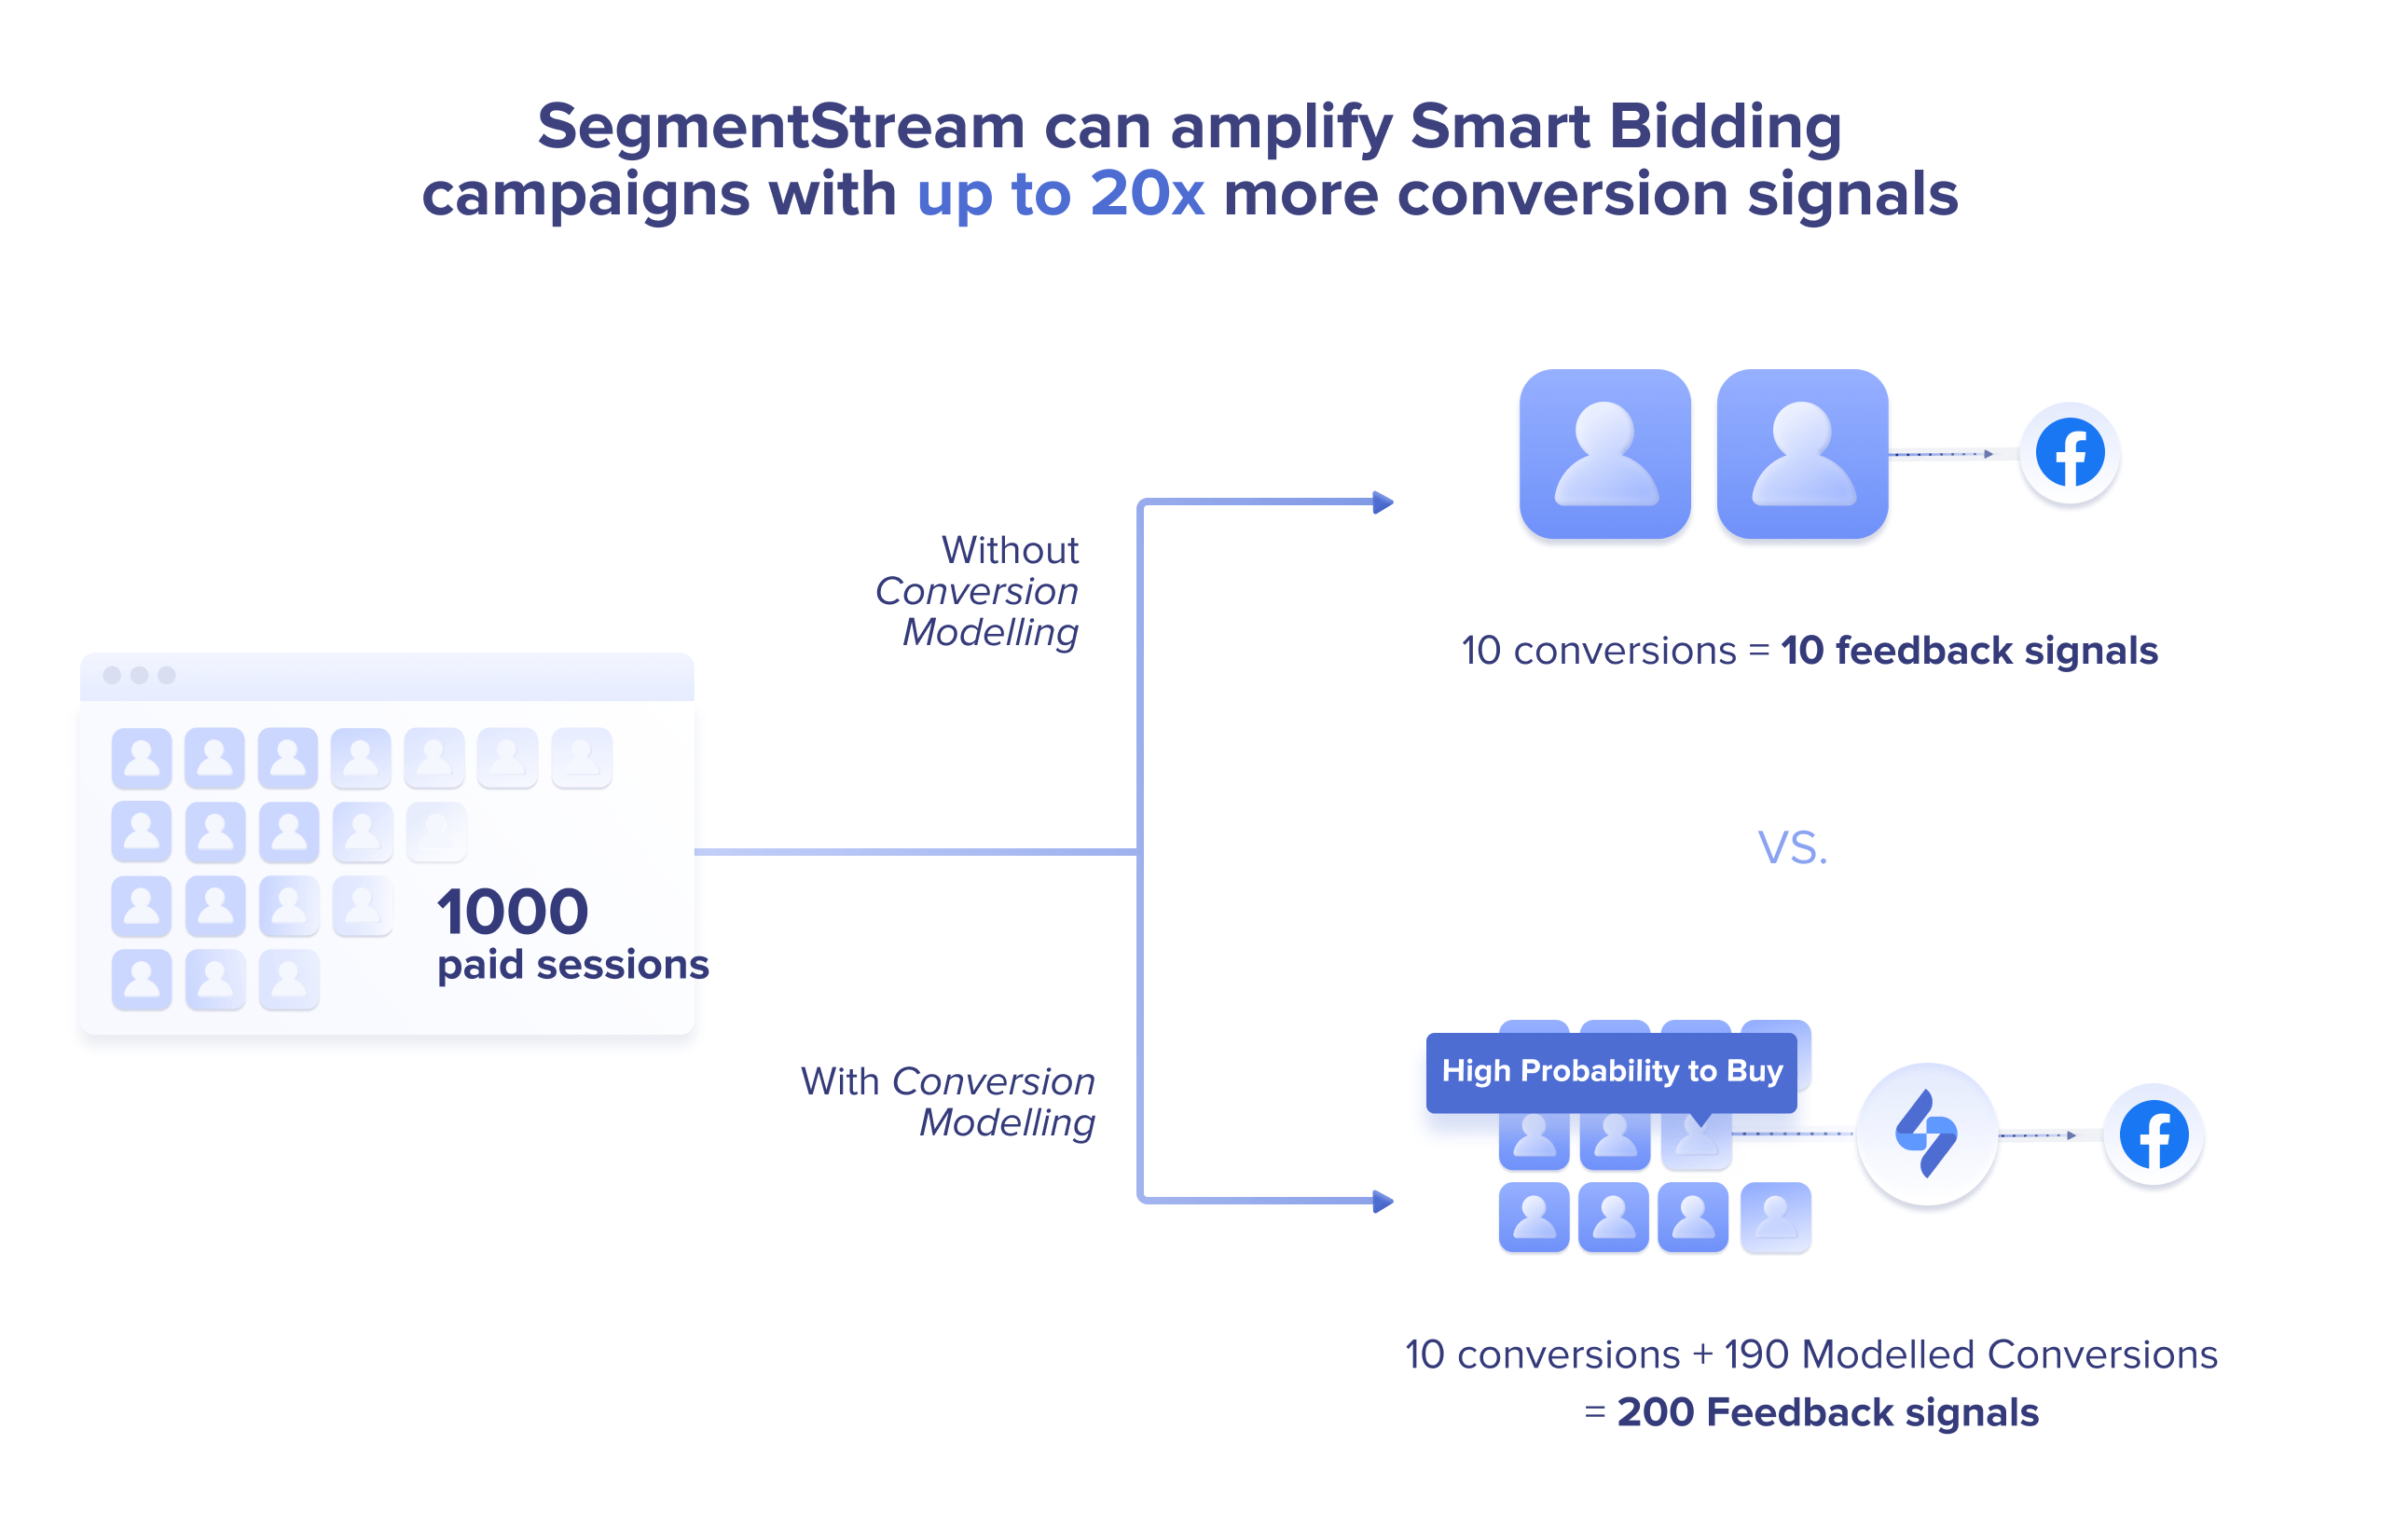 How SegmentStream can amplify Facebook Ads by sending more feedback signals